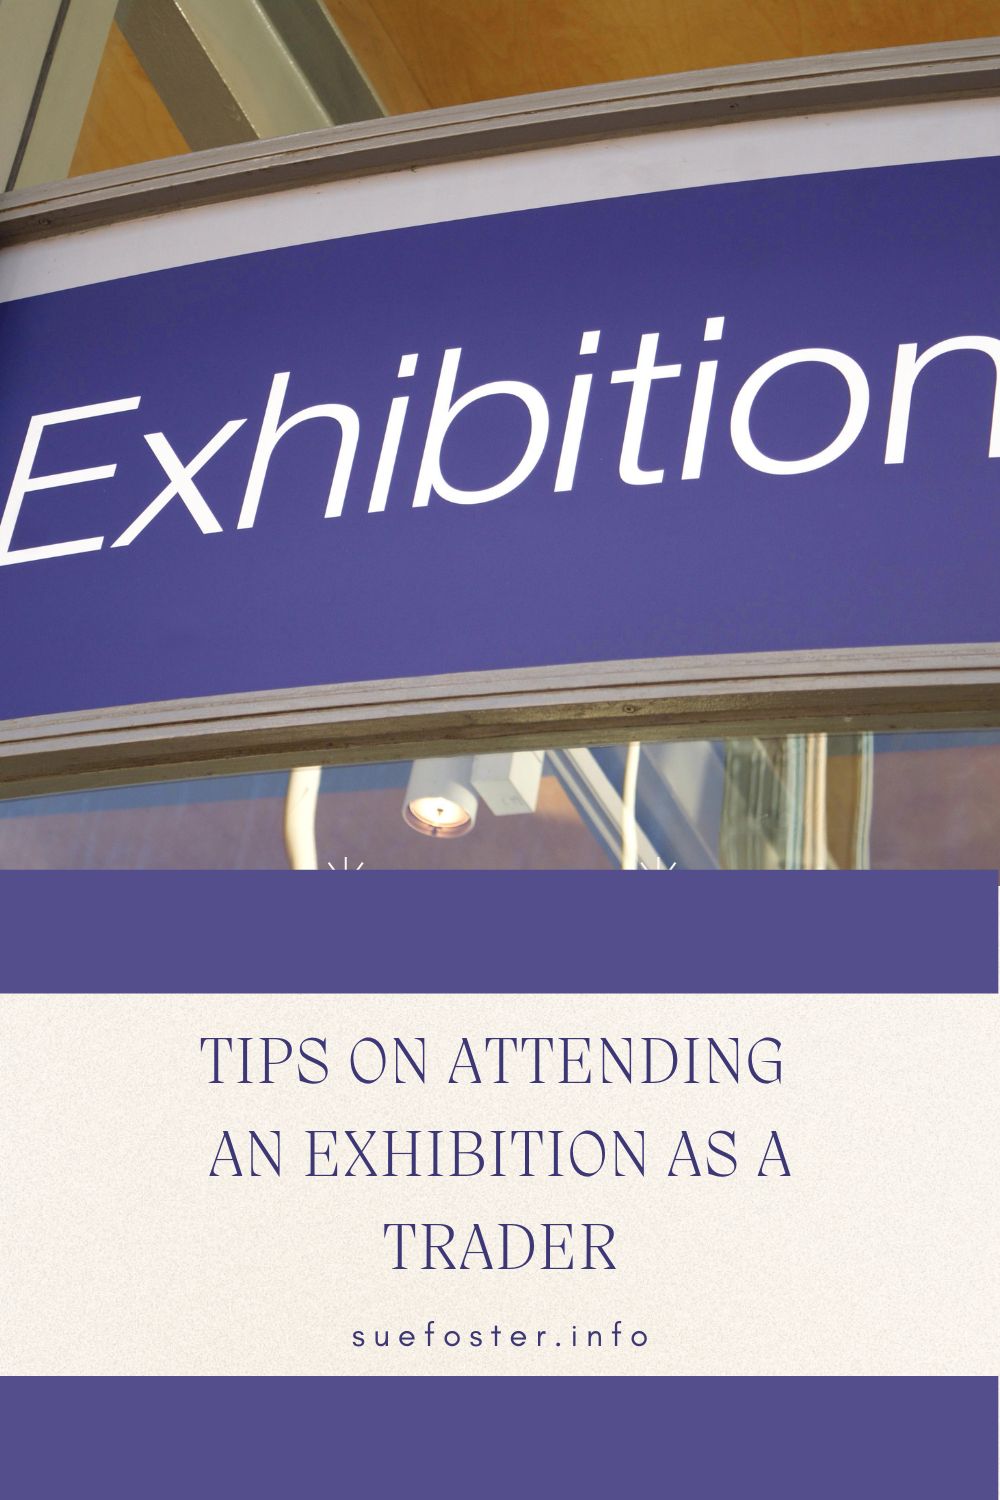 Exhibitions pose the perfect opportunity for you to make a large number of sales and establish yourself as a competitive force within your field.